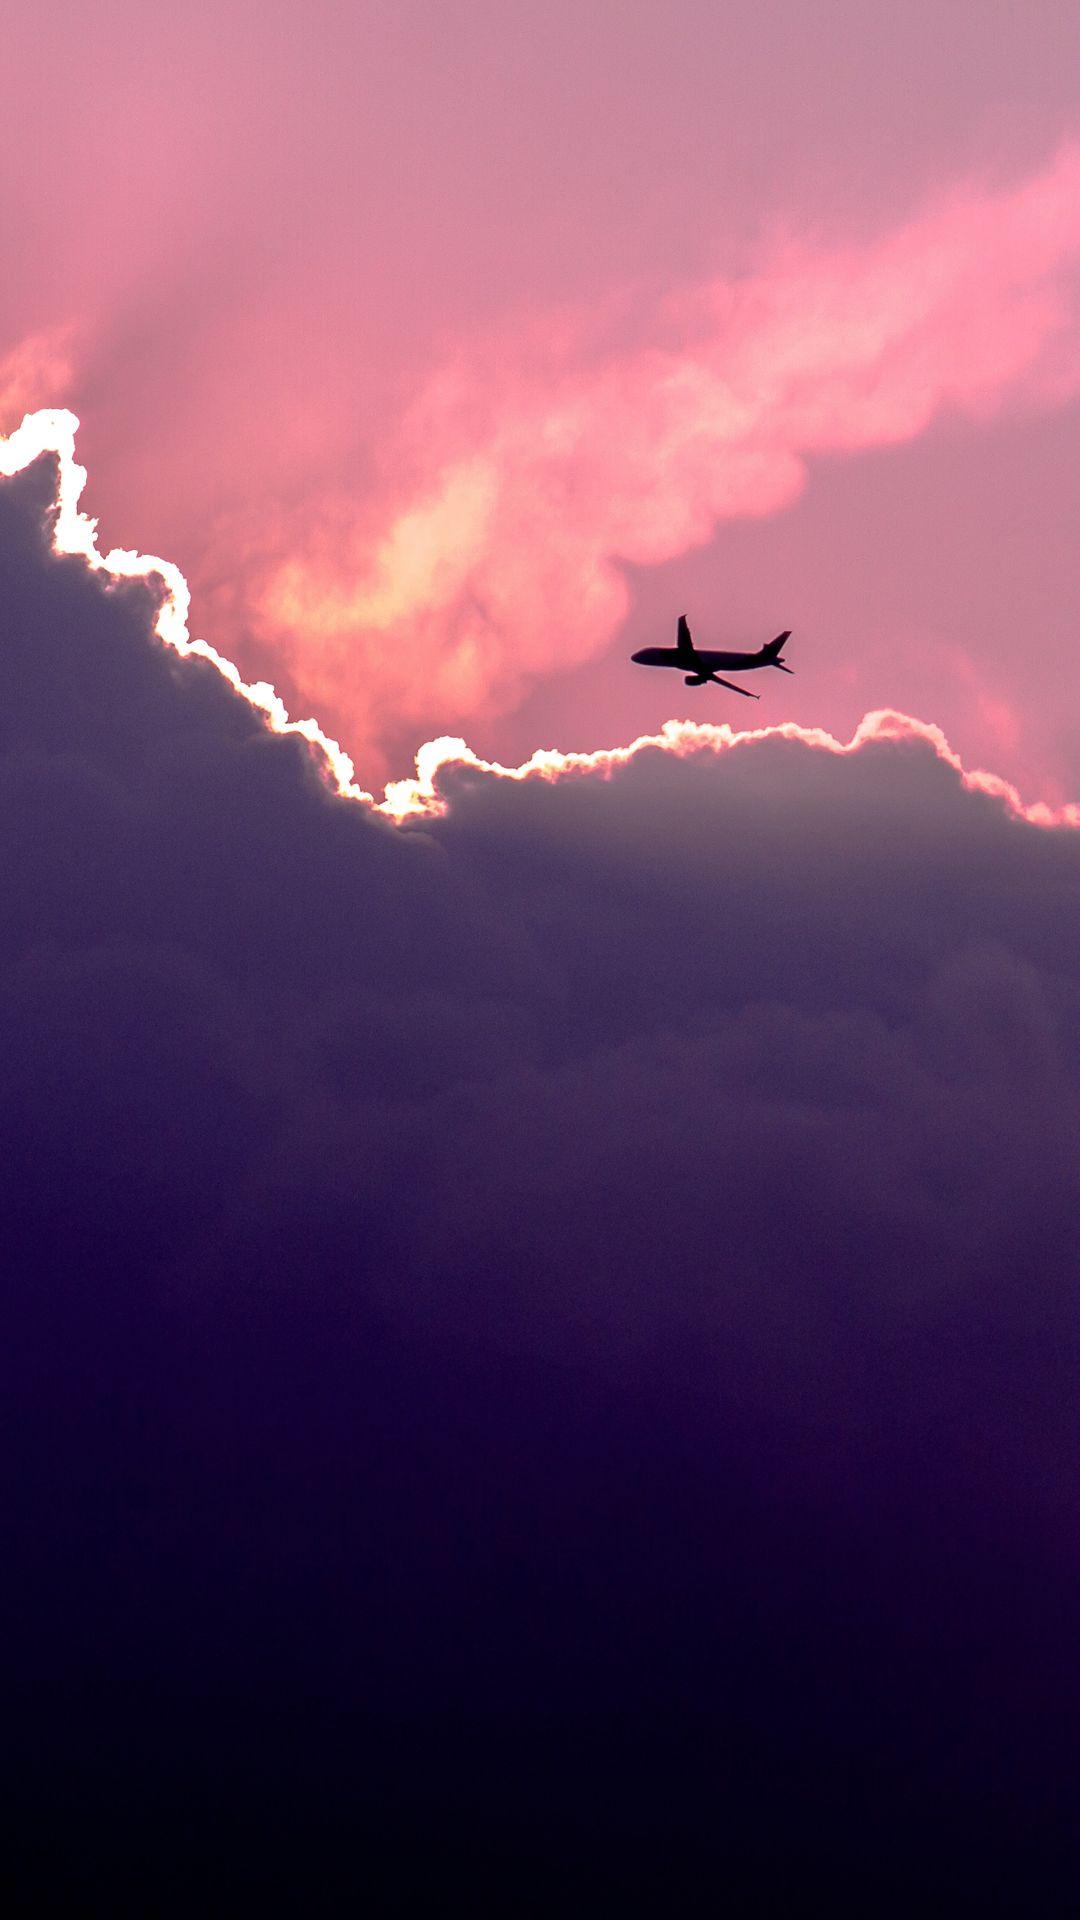 Plane Above Sunset Clouds iPhone 8 Wallpaper. Airplane wallpaper